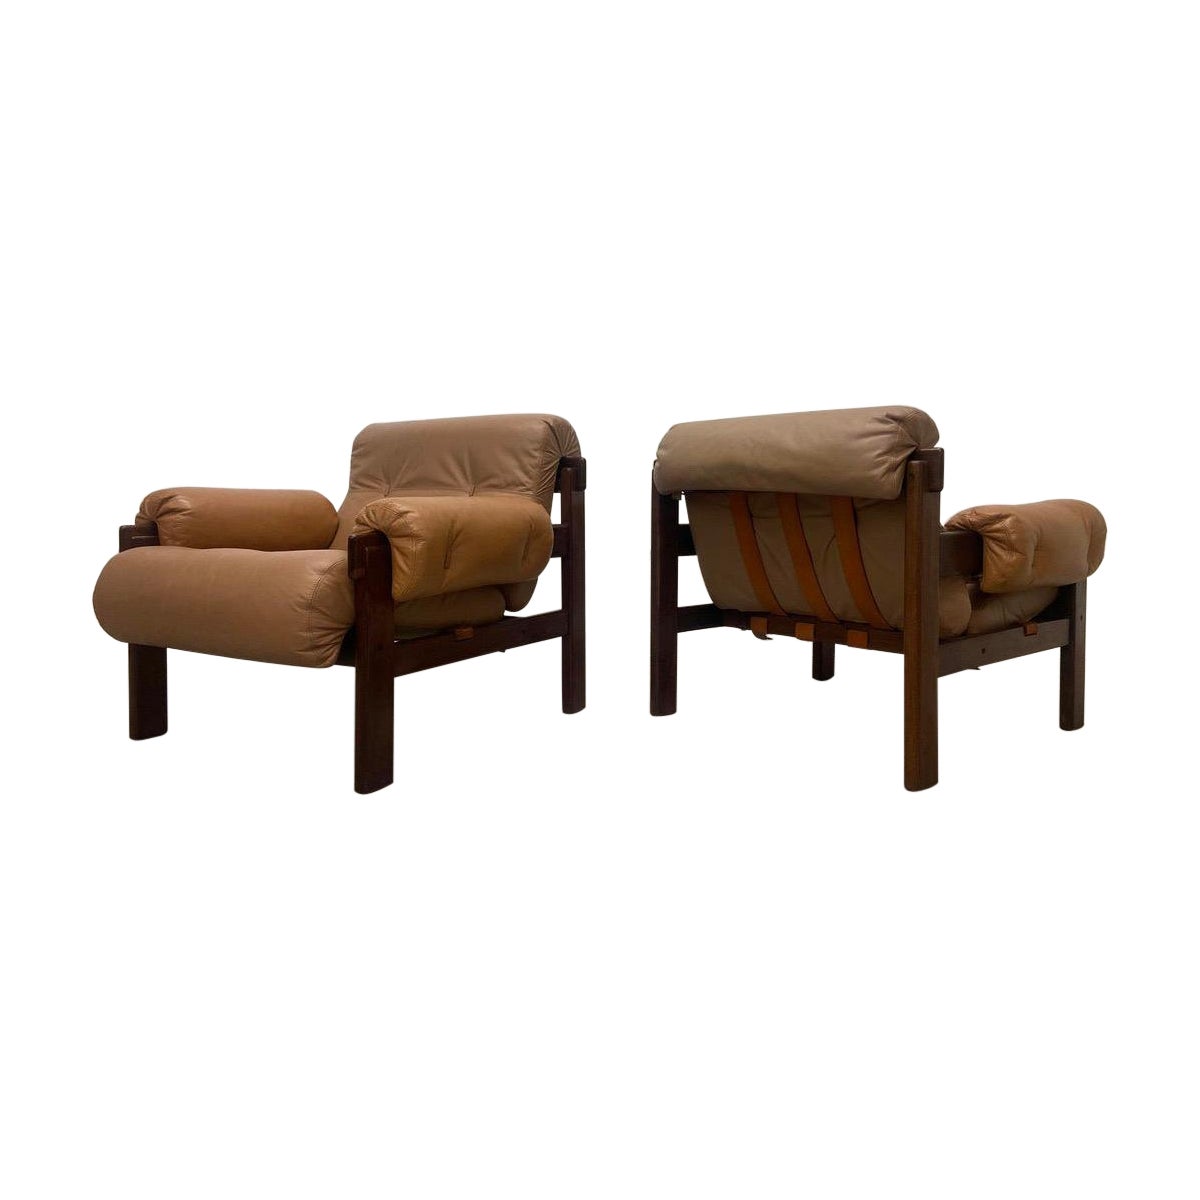 1960s Jean Gillon for Italma of Jacaranda and Leather Lounge Chairs, Set of 2